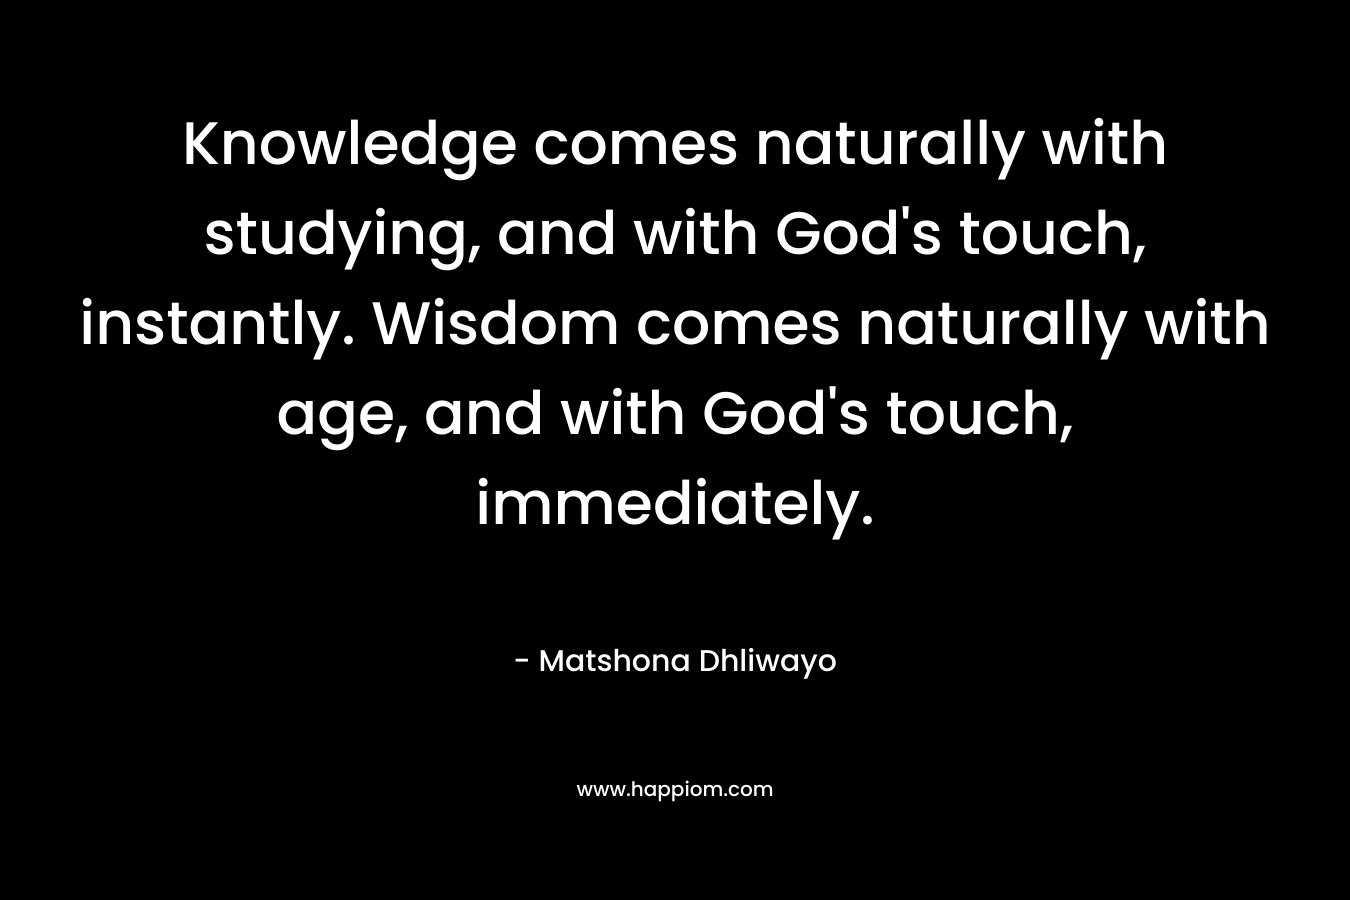 Knowledge comes naturally with studying, and with God's touch, instantly. Wisdom comes naturally with age, and with God's touch, immediately.